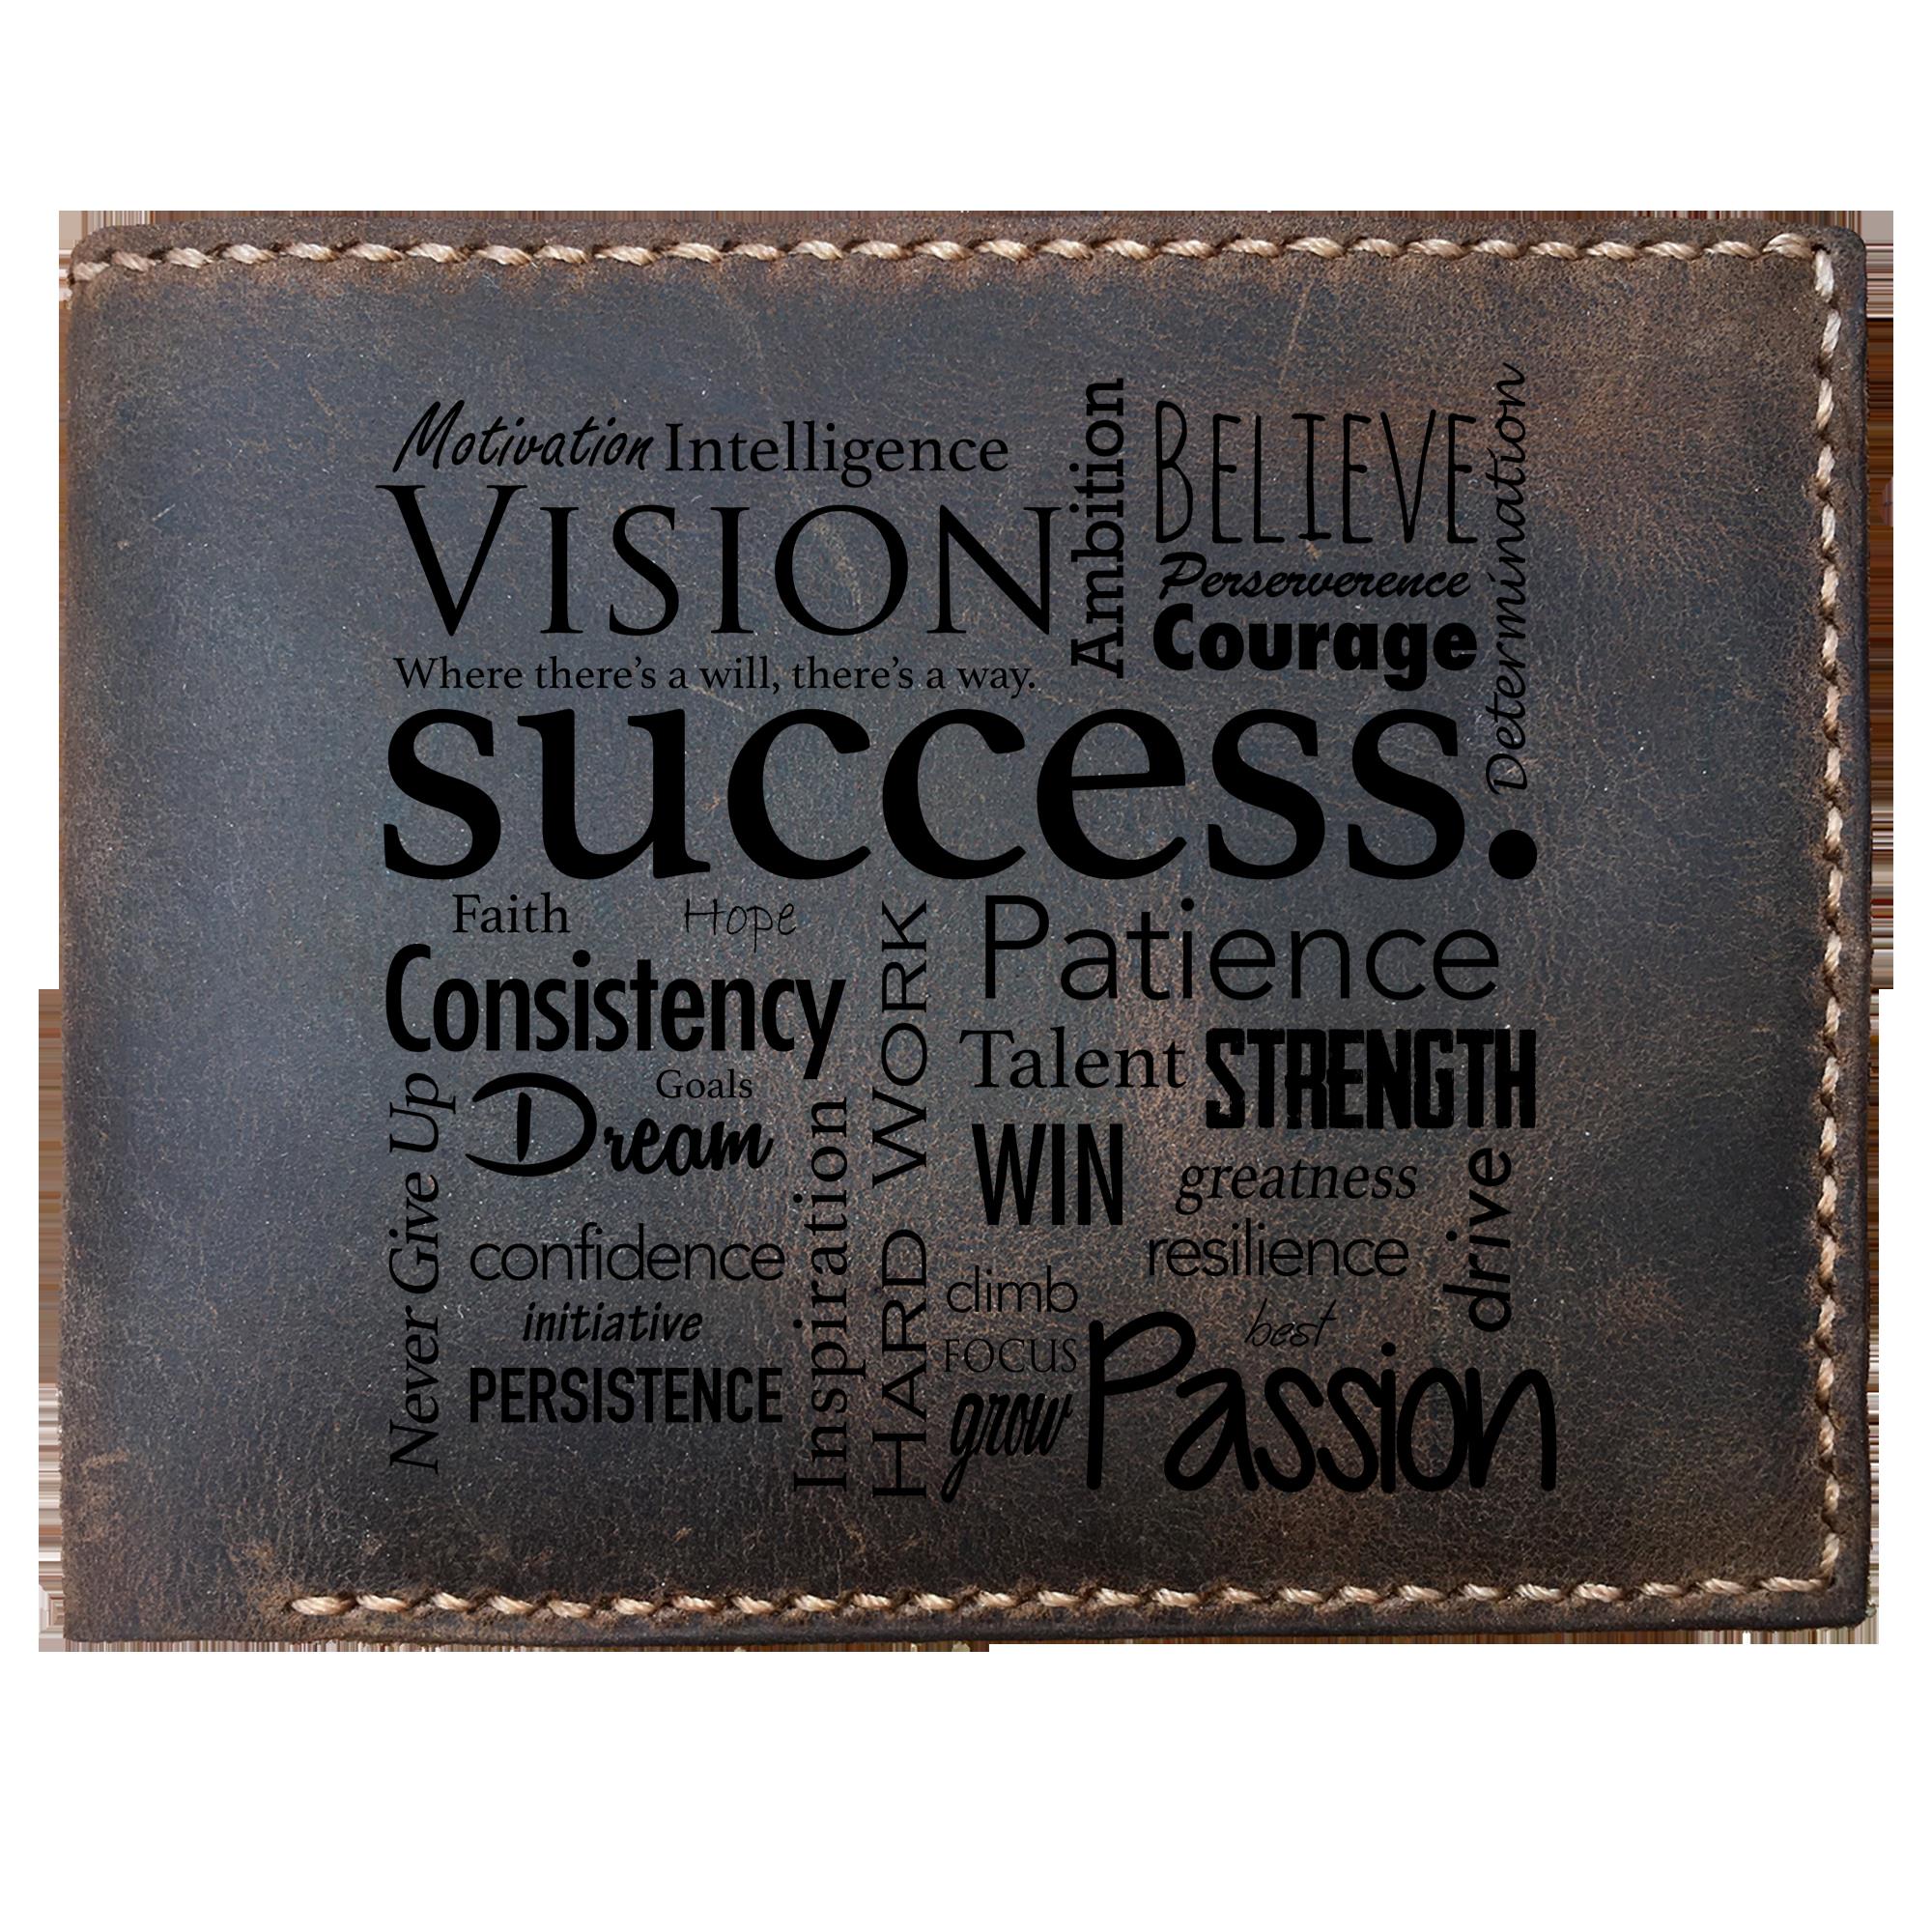 Skitongifts Funny Custom Laser Engraved Bifold Leather Wallet For Men, Success Vision Passion Gloss Finish